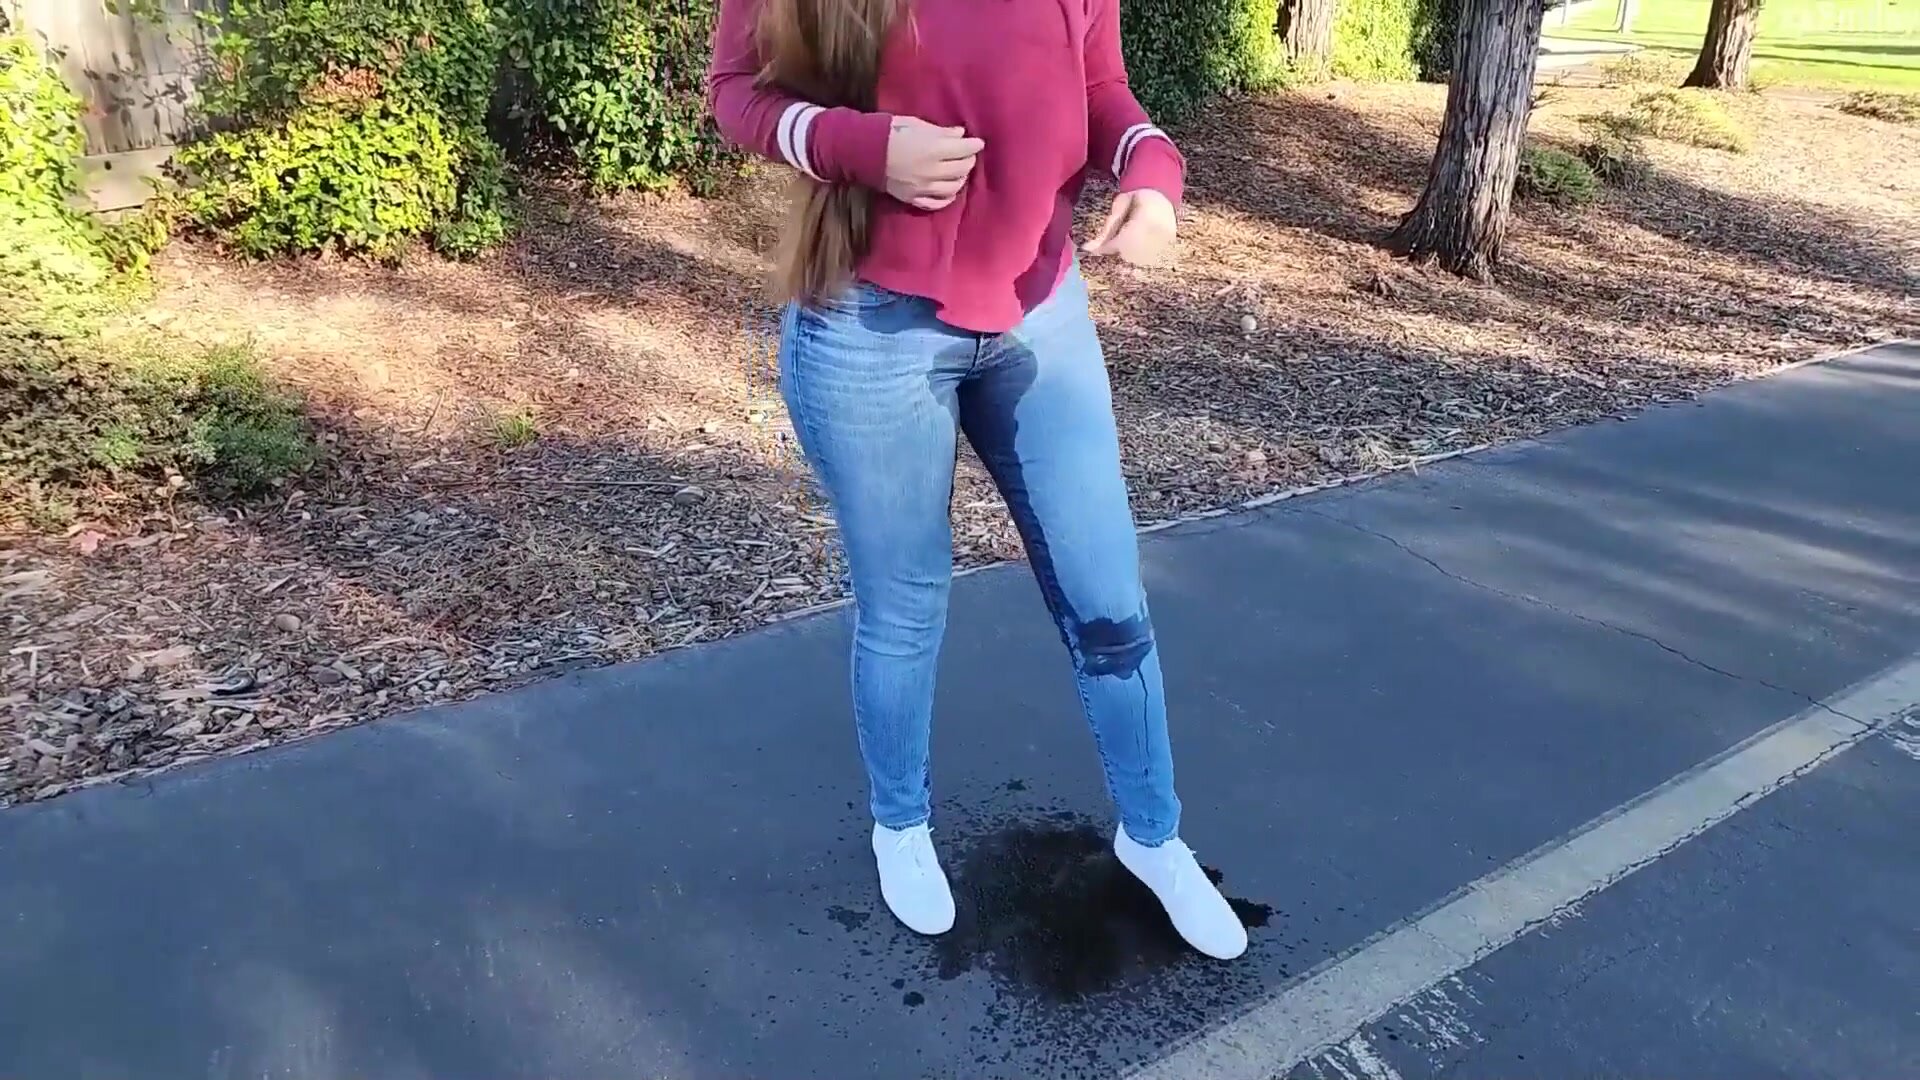 Hot chick pees jeans walking